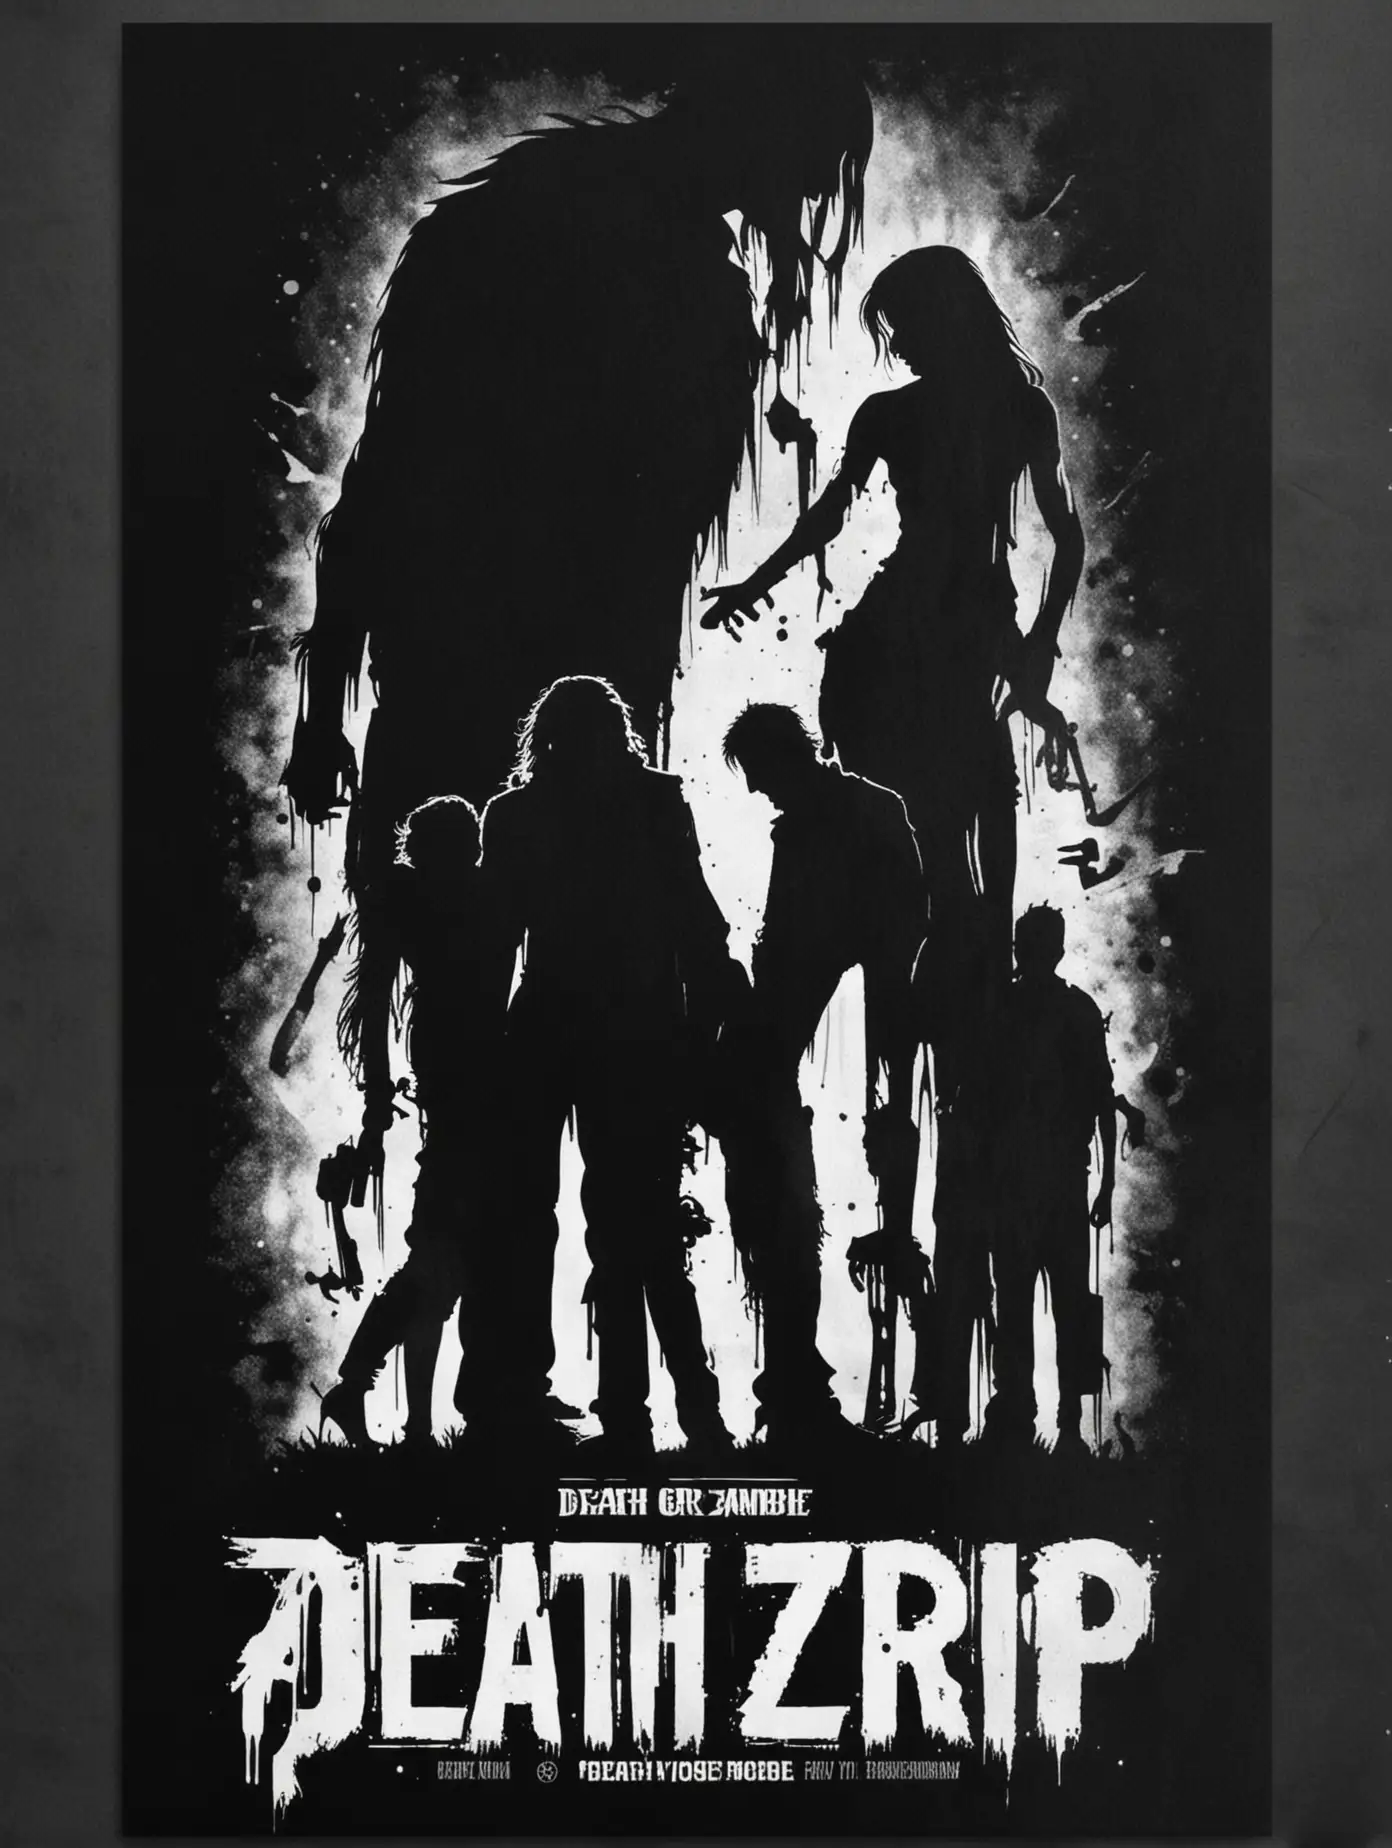 stencil, minimalist, simple, vector art, black and white, silhouette, negative space, grindhouse zombie movie poster, "Death Grip"